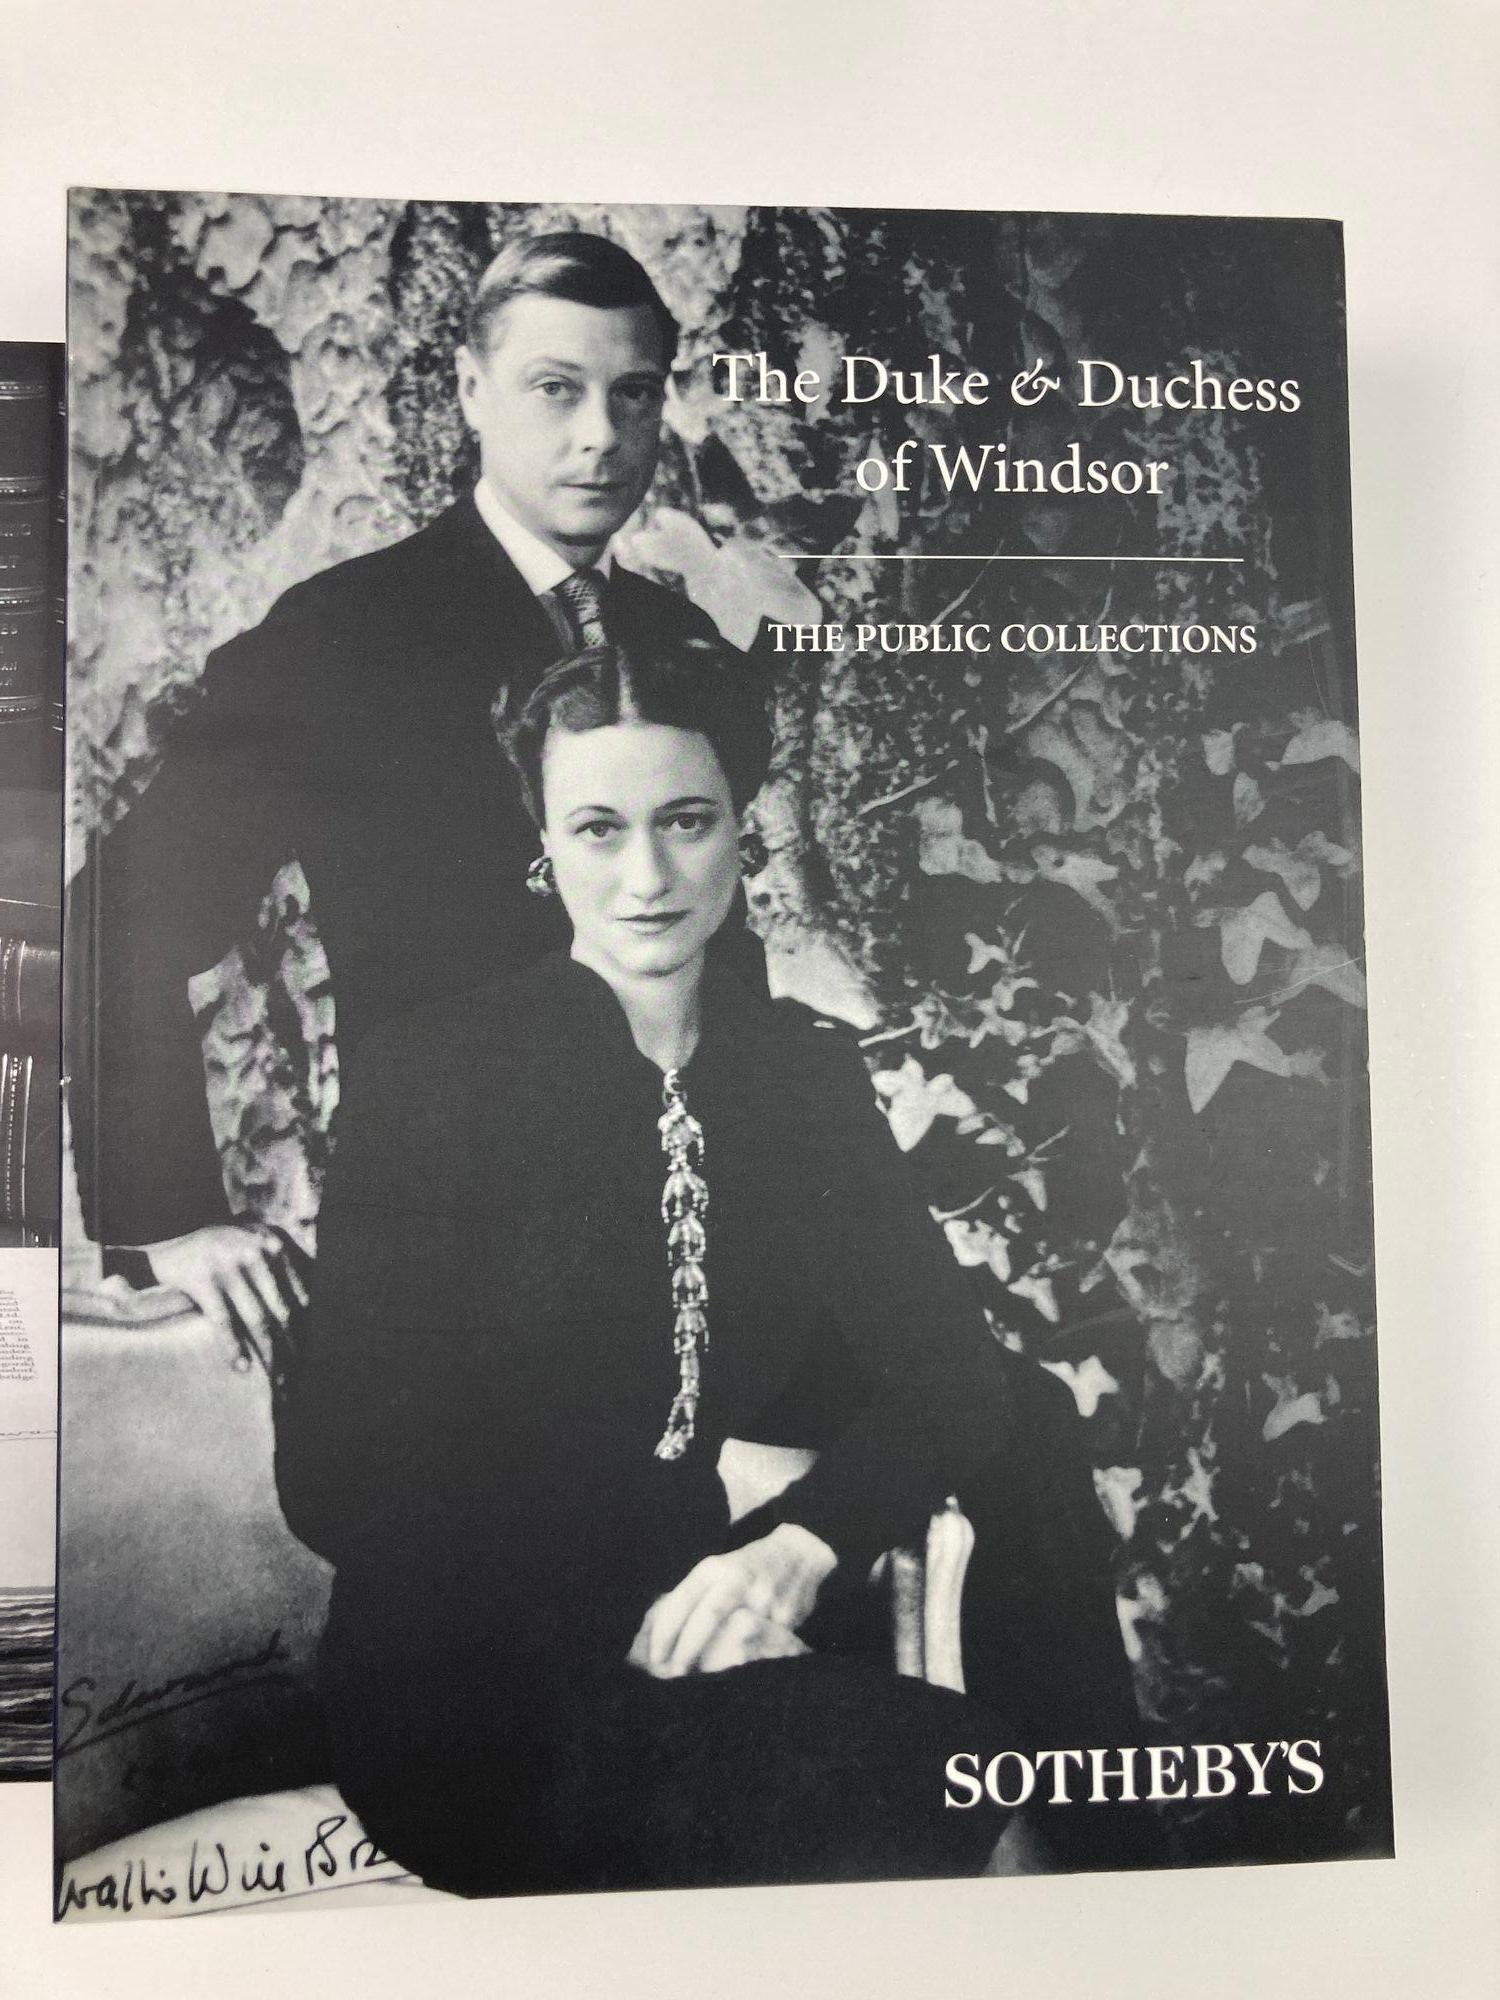 20th Century The Duke and Duchess of Windsor Auction Sothebys Books Catalogs in Slipcase Box For Sale